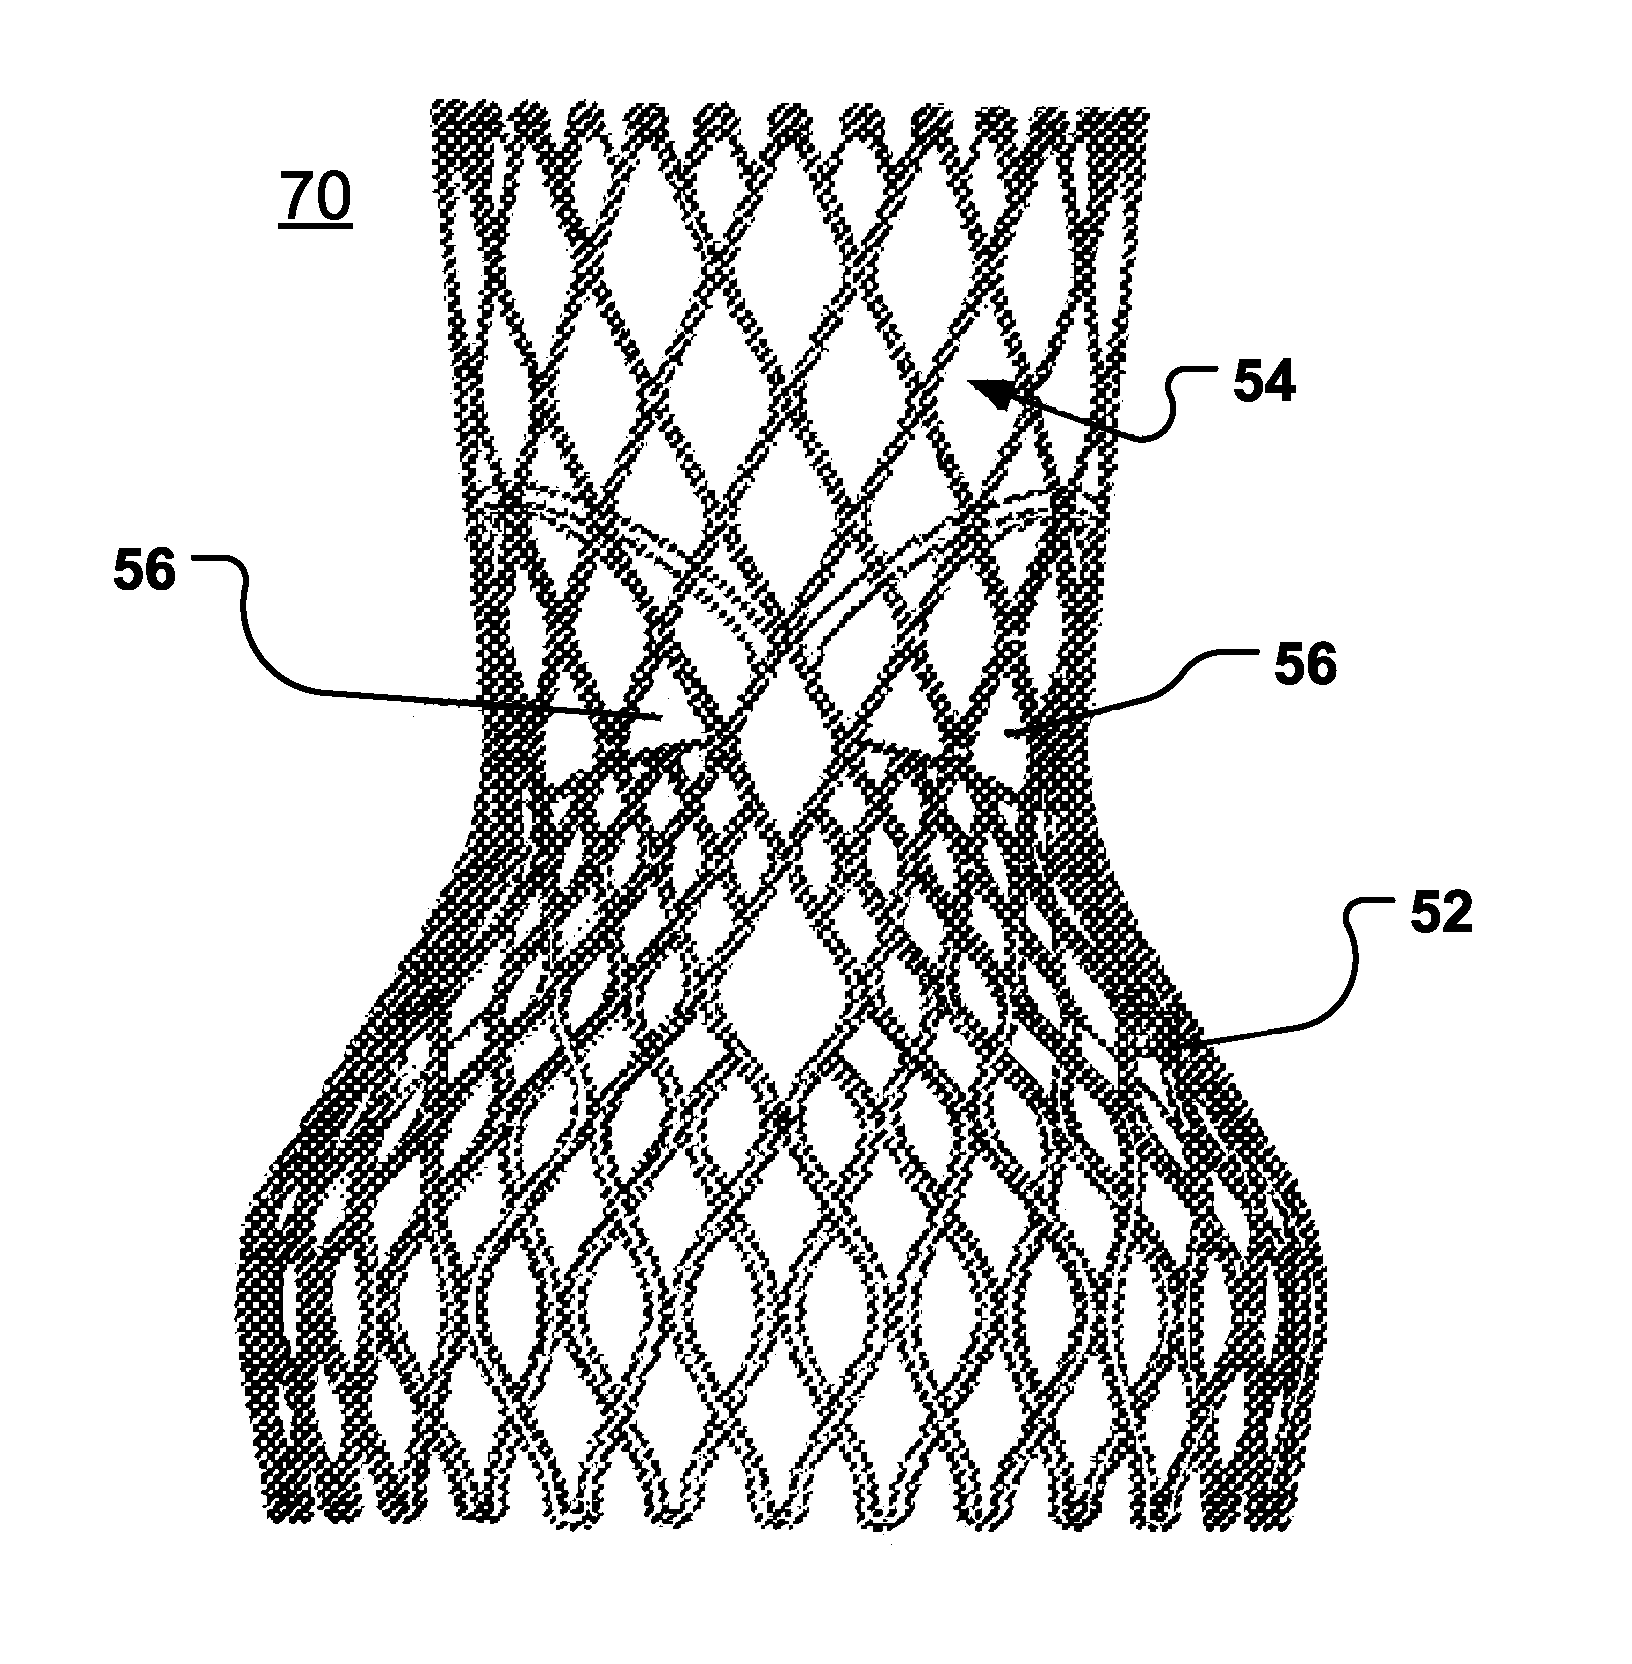 Arrangement, A Loop-Shaped Support, A Prosthetic Heart Valve And A Method Of Repairing Or Replacing A Native Heart Valve